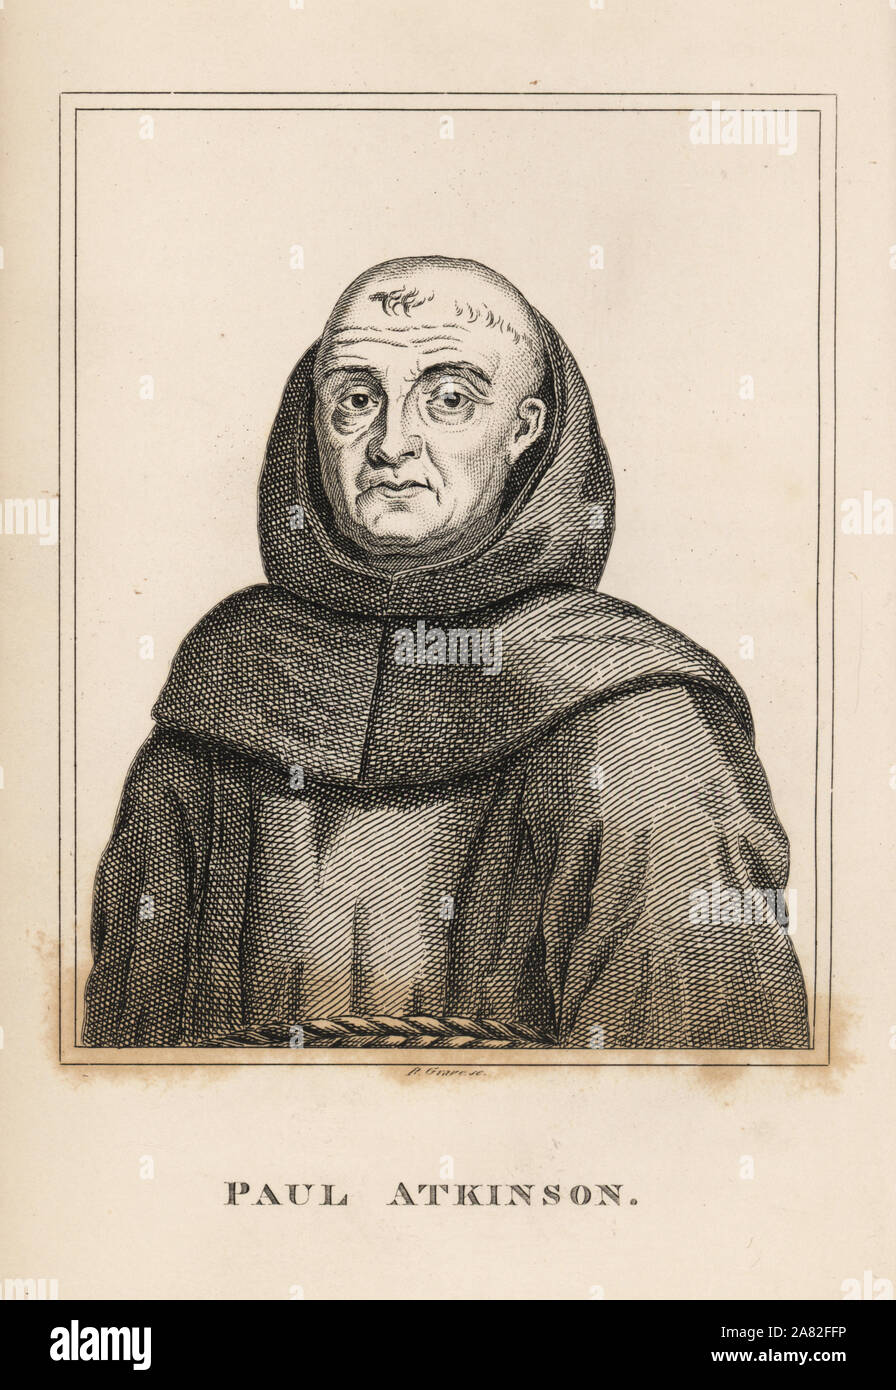 Paul Atkinson, Fransiscan friar condemned to life imprisonment in Hurst Castle, Isle of Wight, 18th century. Engraving by R. Grave from James Caulfield's Portraits, Memoirs and Characters of Remarkable Persons, London, 1819. Stock Photo